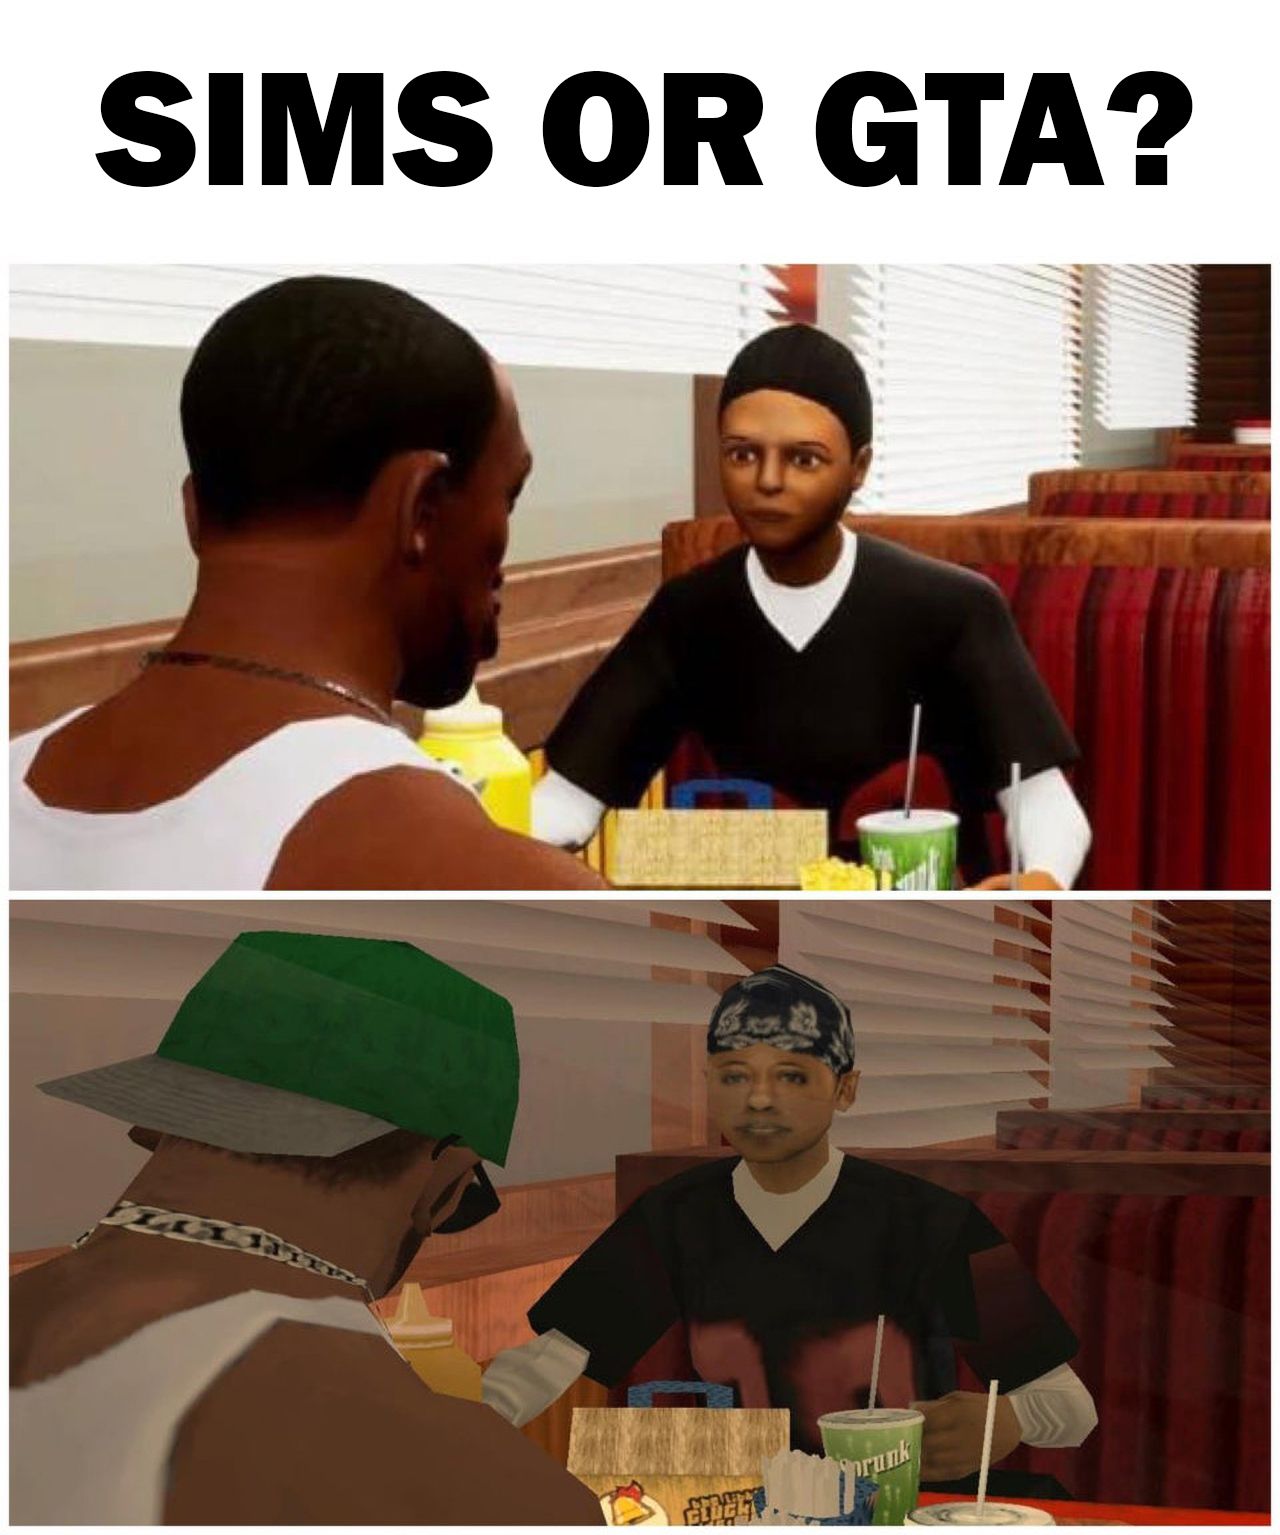 The Definitive Edition of GTA San Andreas, everybody